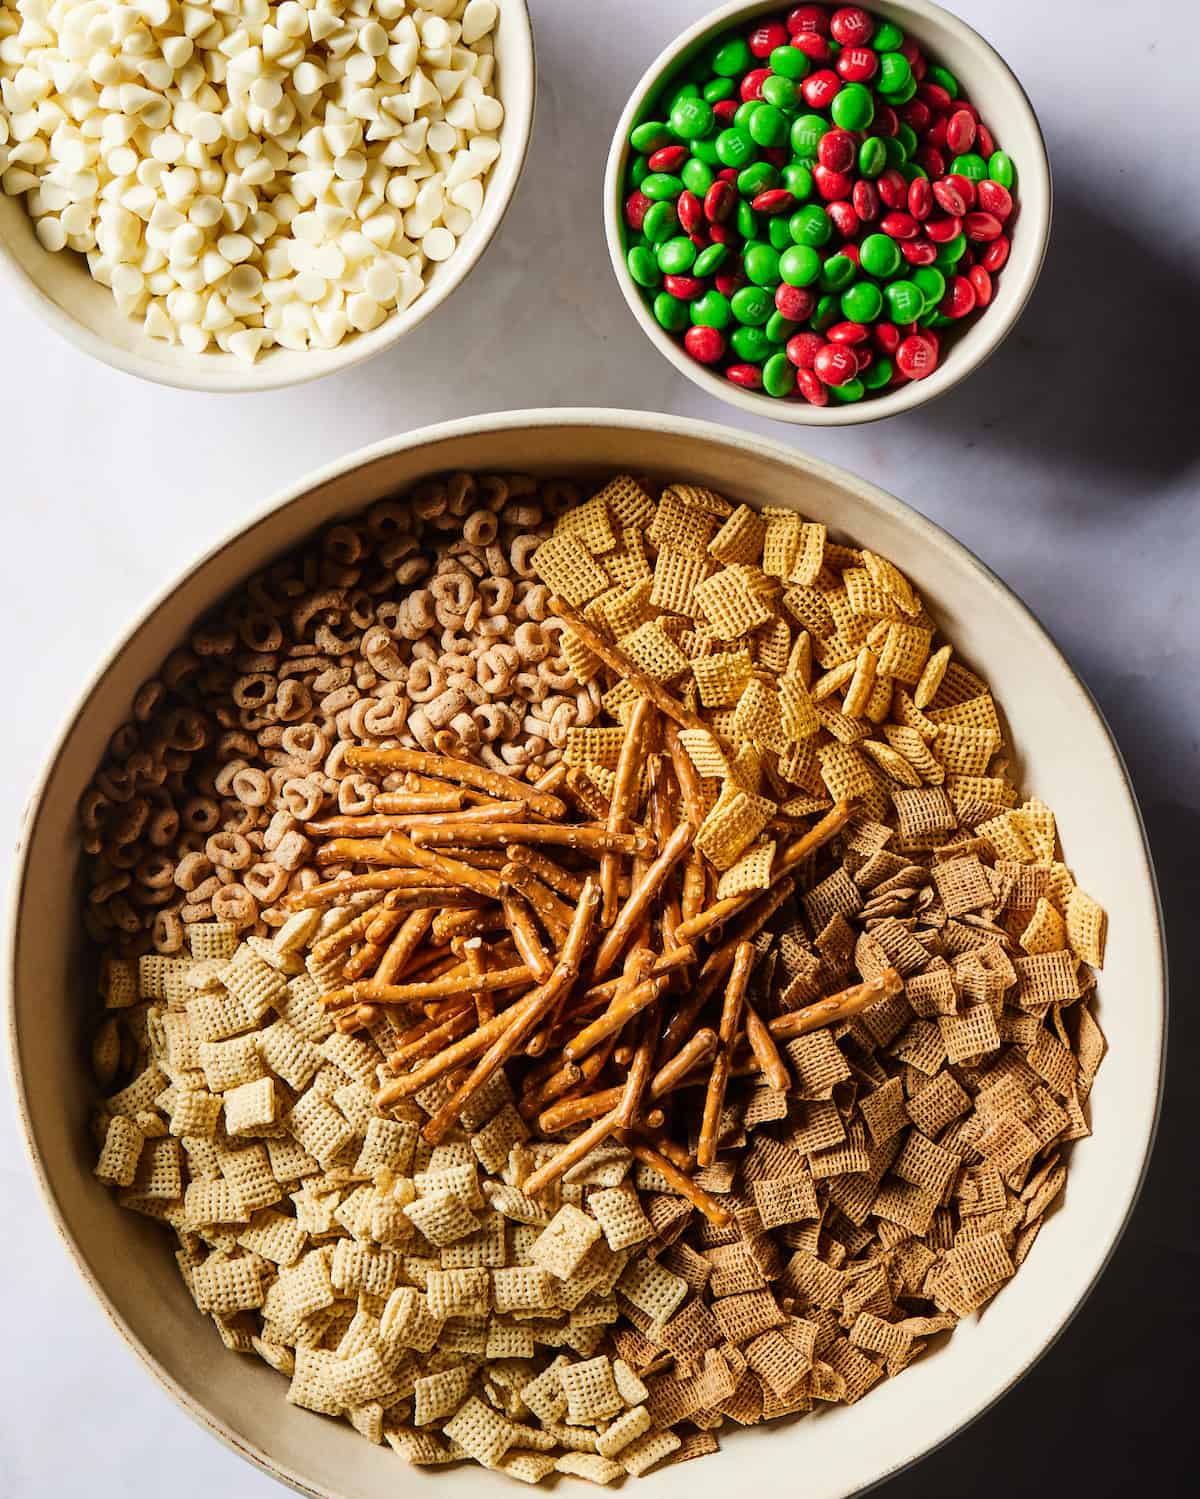 A large white round bowl with corn chex, wheat chex, rice chex, cheerios and pretzel sticks in it, with a small bowl full of red and green M&Ms and another small bowl with white chocolate chips on its side.